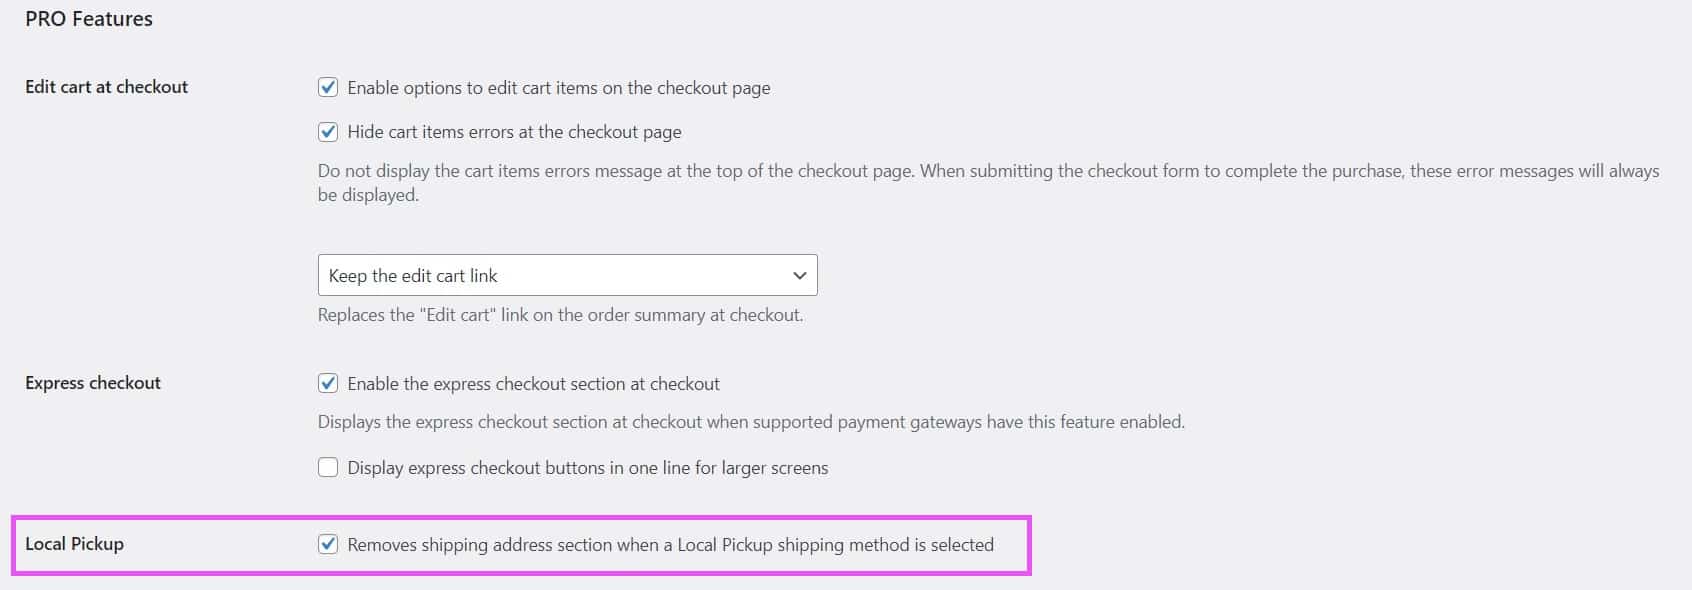 Screenshot of the Local Pickup feature option in the Fluid Checkout plugin settings.